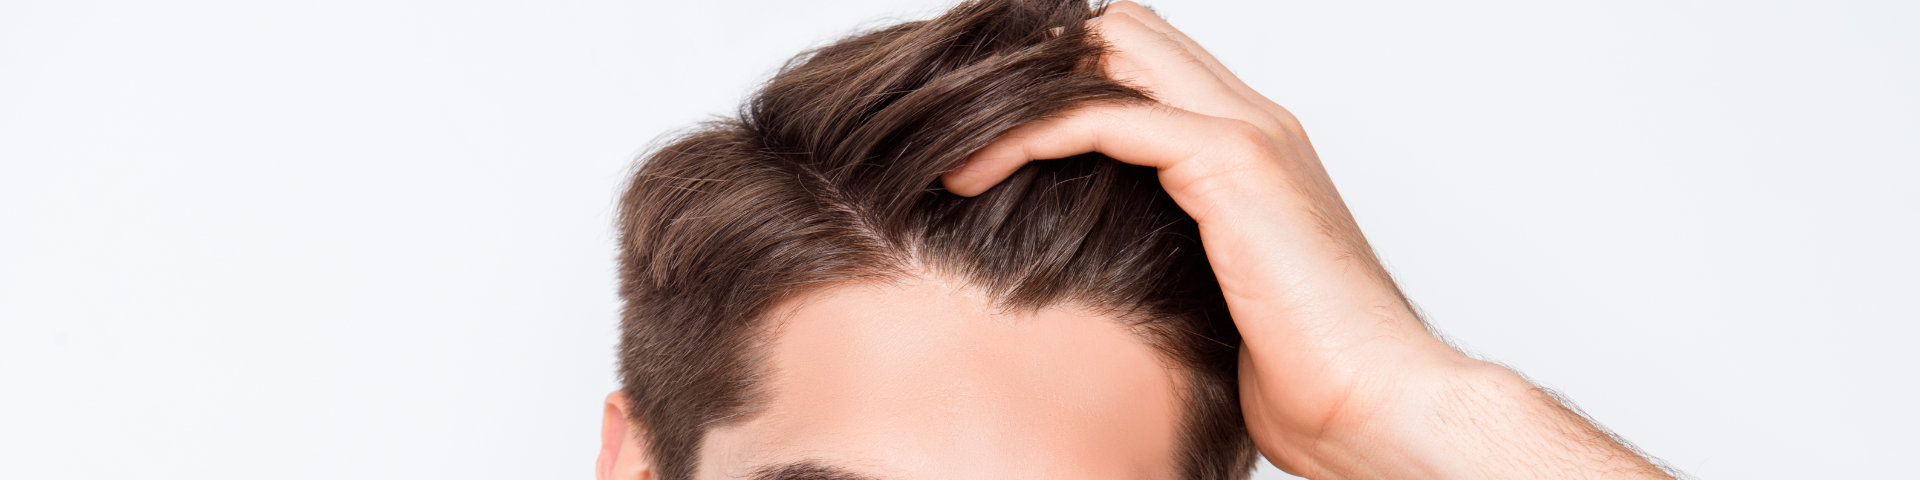 How Does Stress Cause Hair Loss and What Can You Do About It? Pasadena, CA